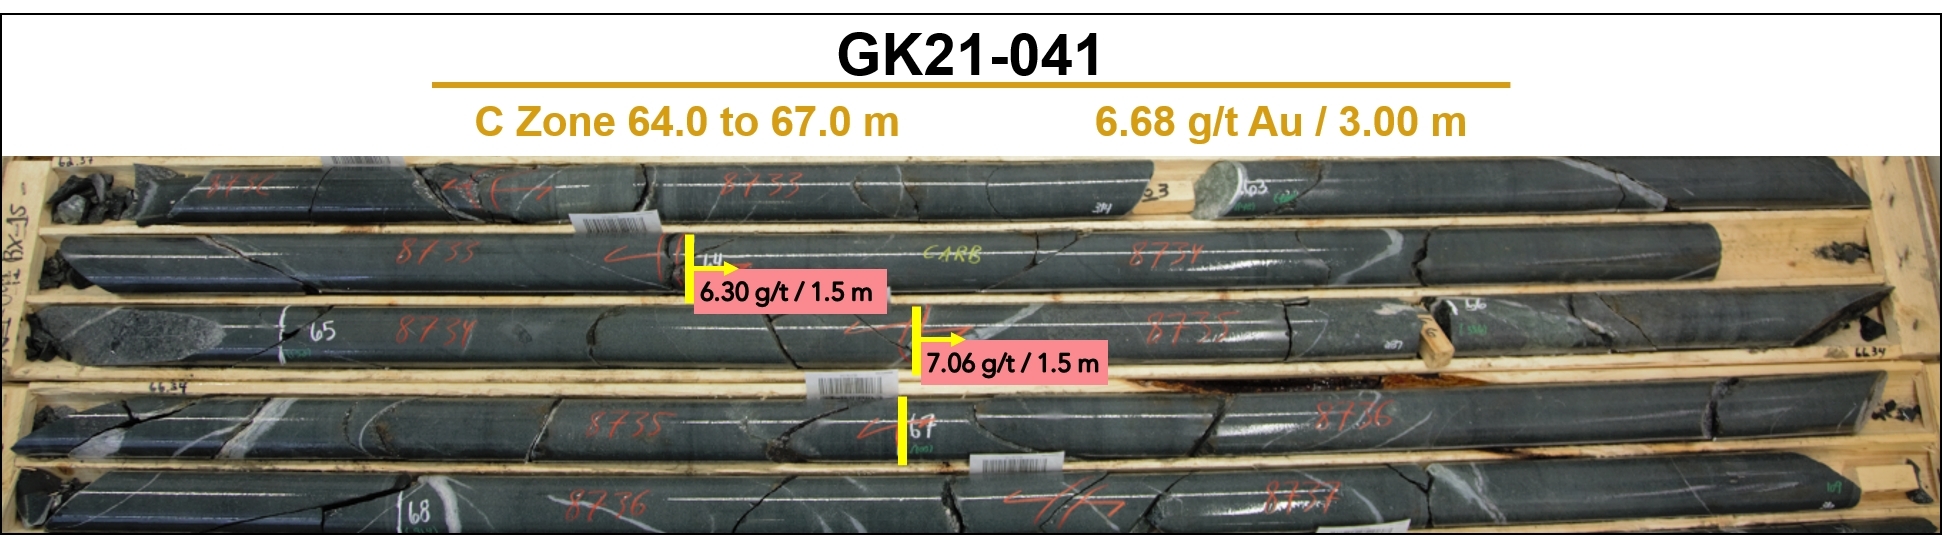 Warrior Gold Intersects Gold In All Holes And Extends A Zone Mineralization Business Wire